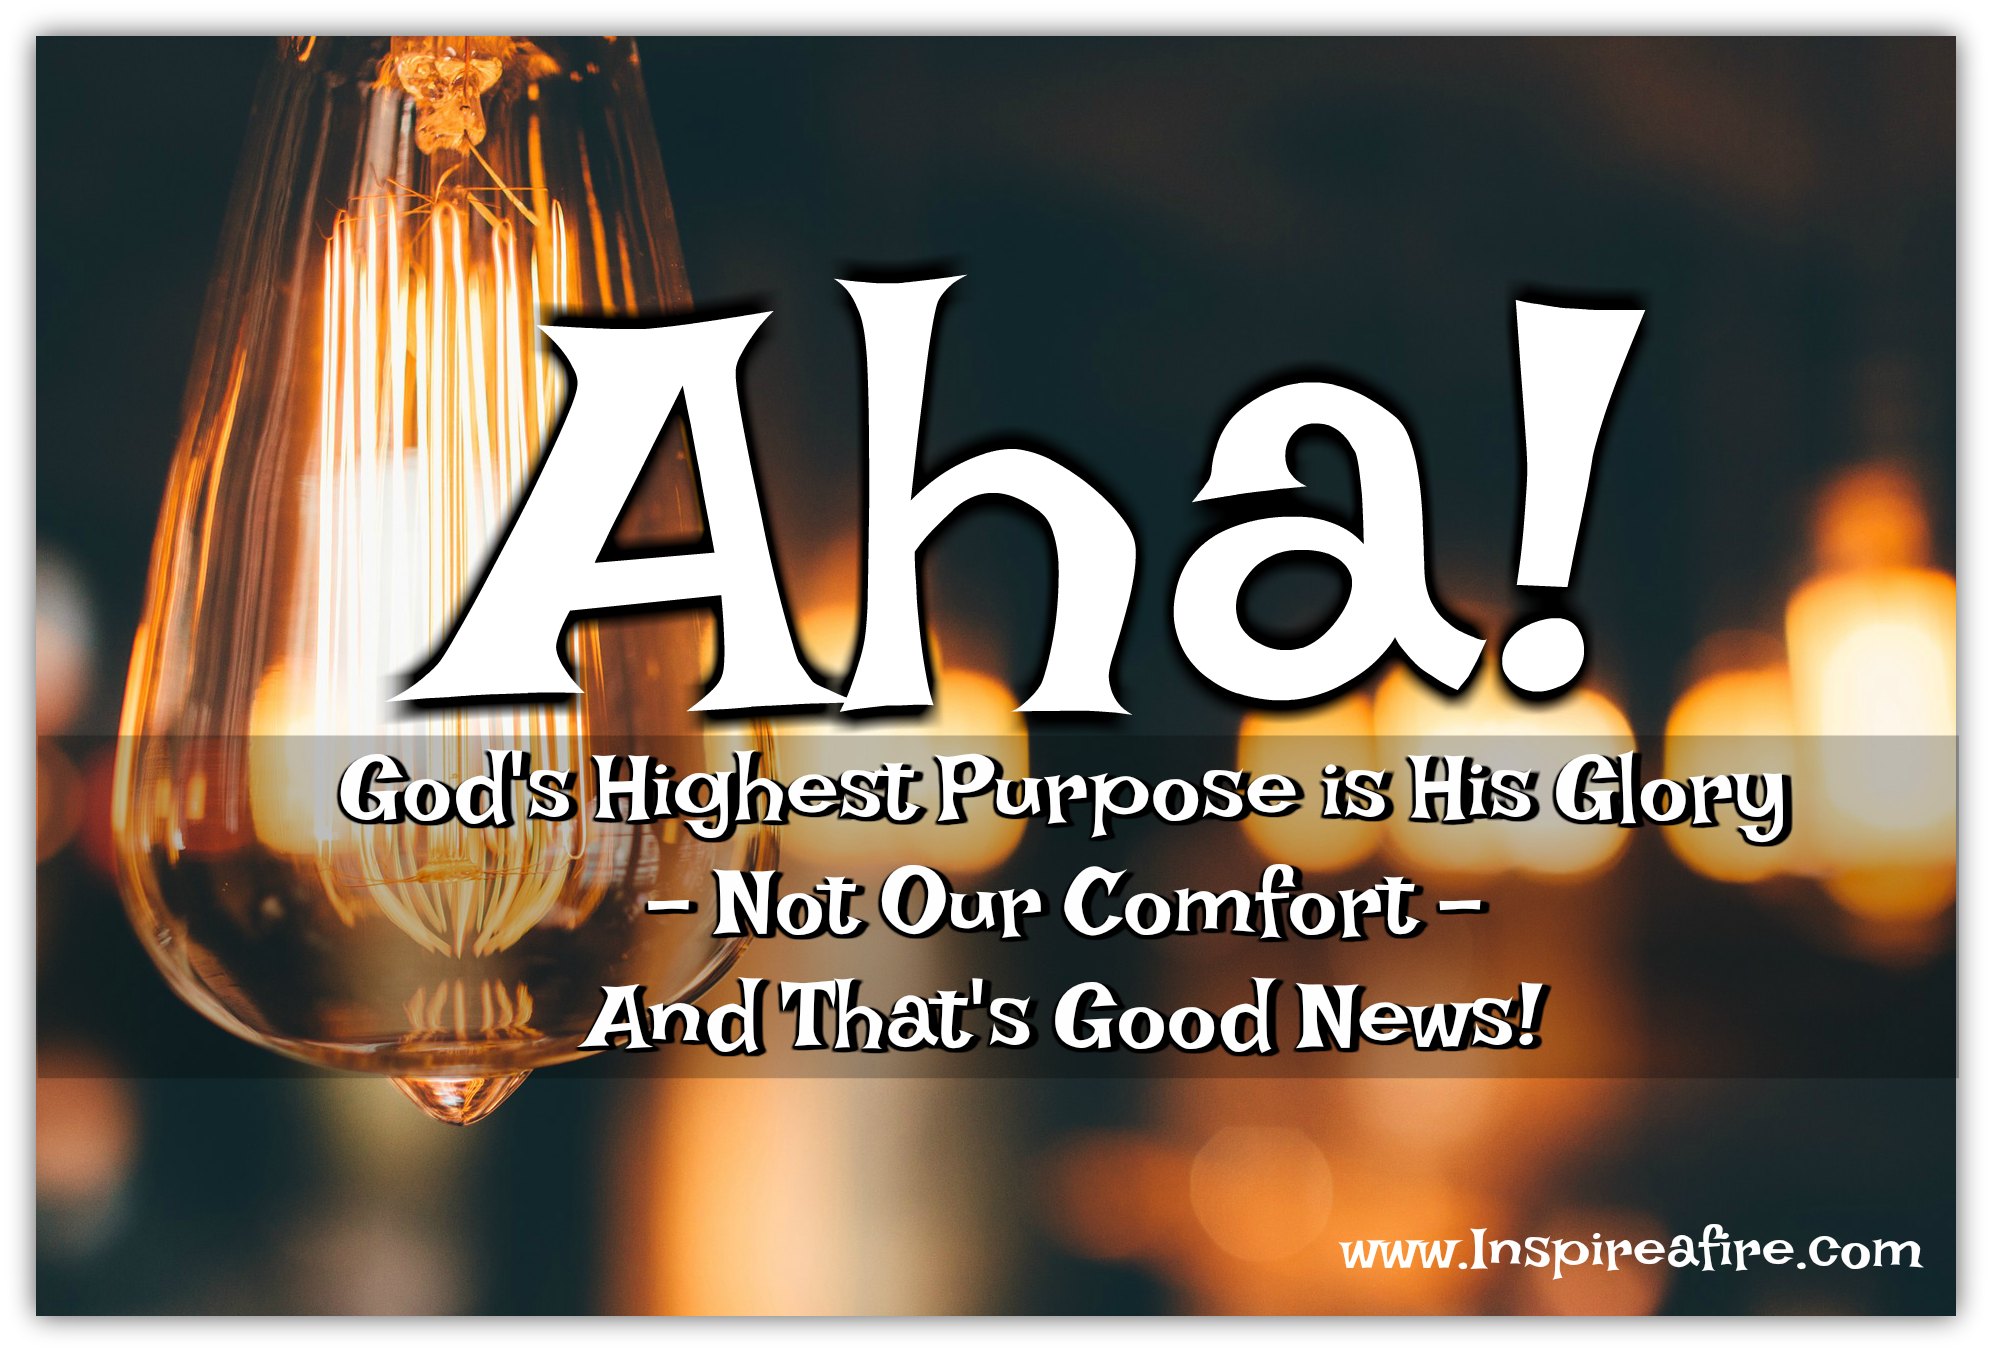 God's Glory is His Highest Purpose-not our comfort-and that's good news for us! (Jean Wilund via www.inspireafire.com)